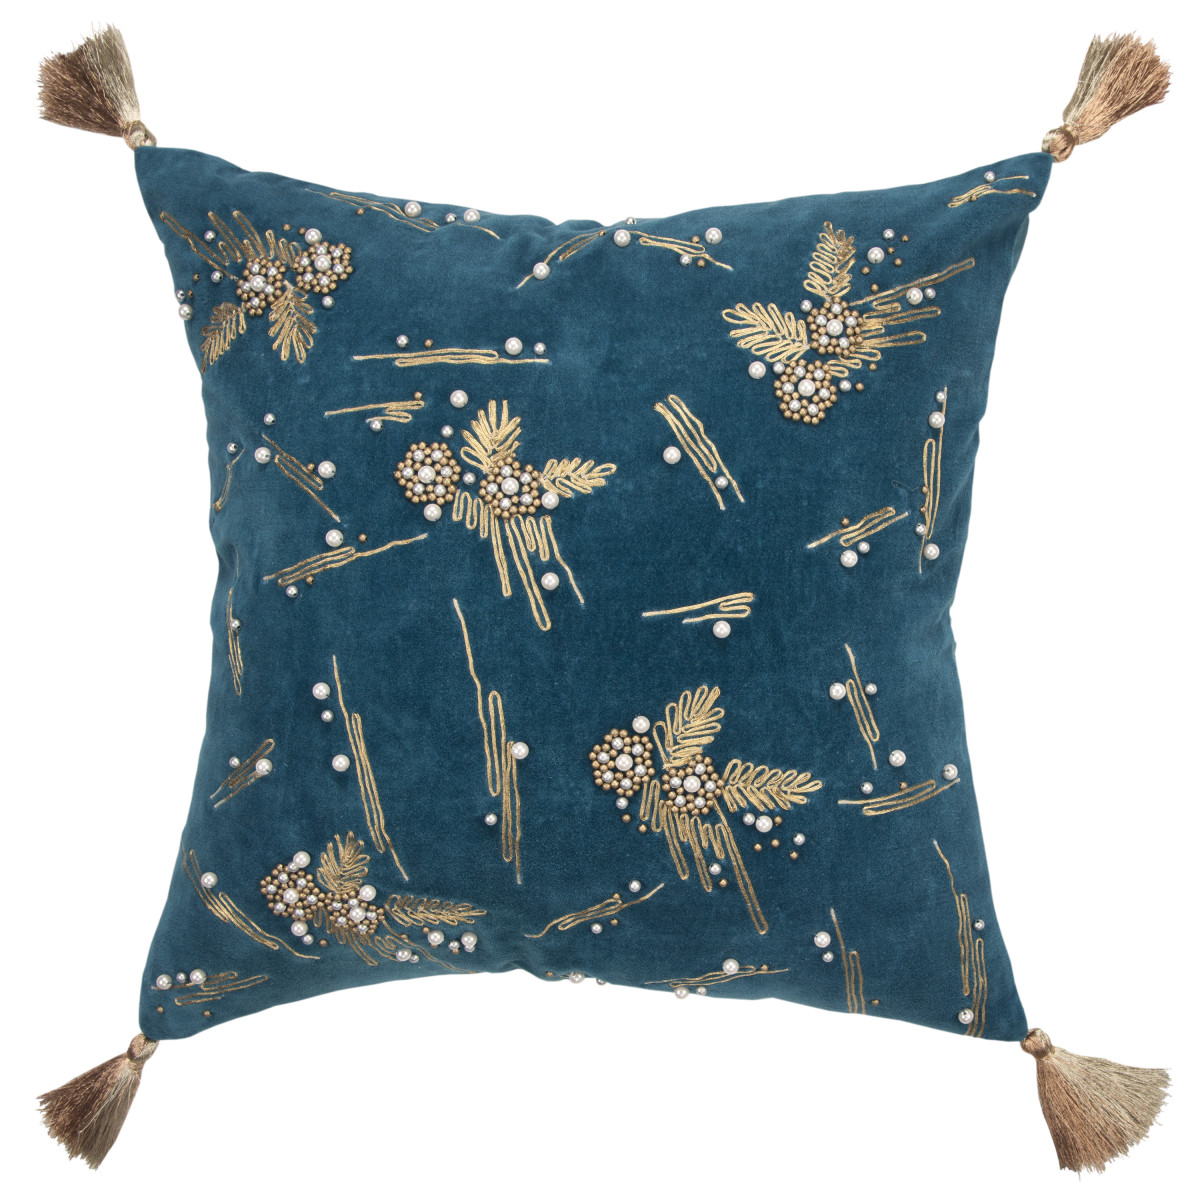 Shop Rizzy Home 18" X 18" Pillow from DiMare Design on Openhaus